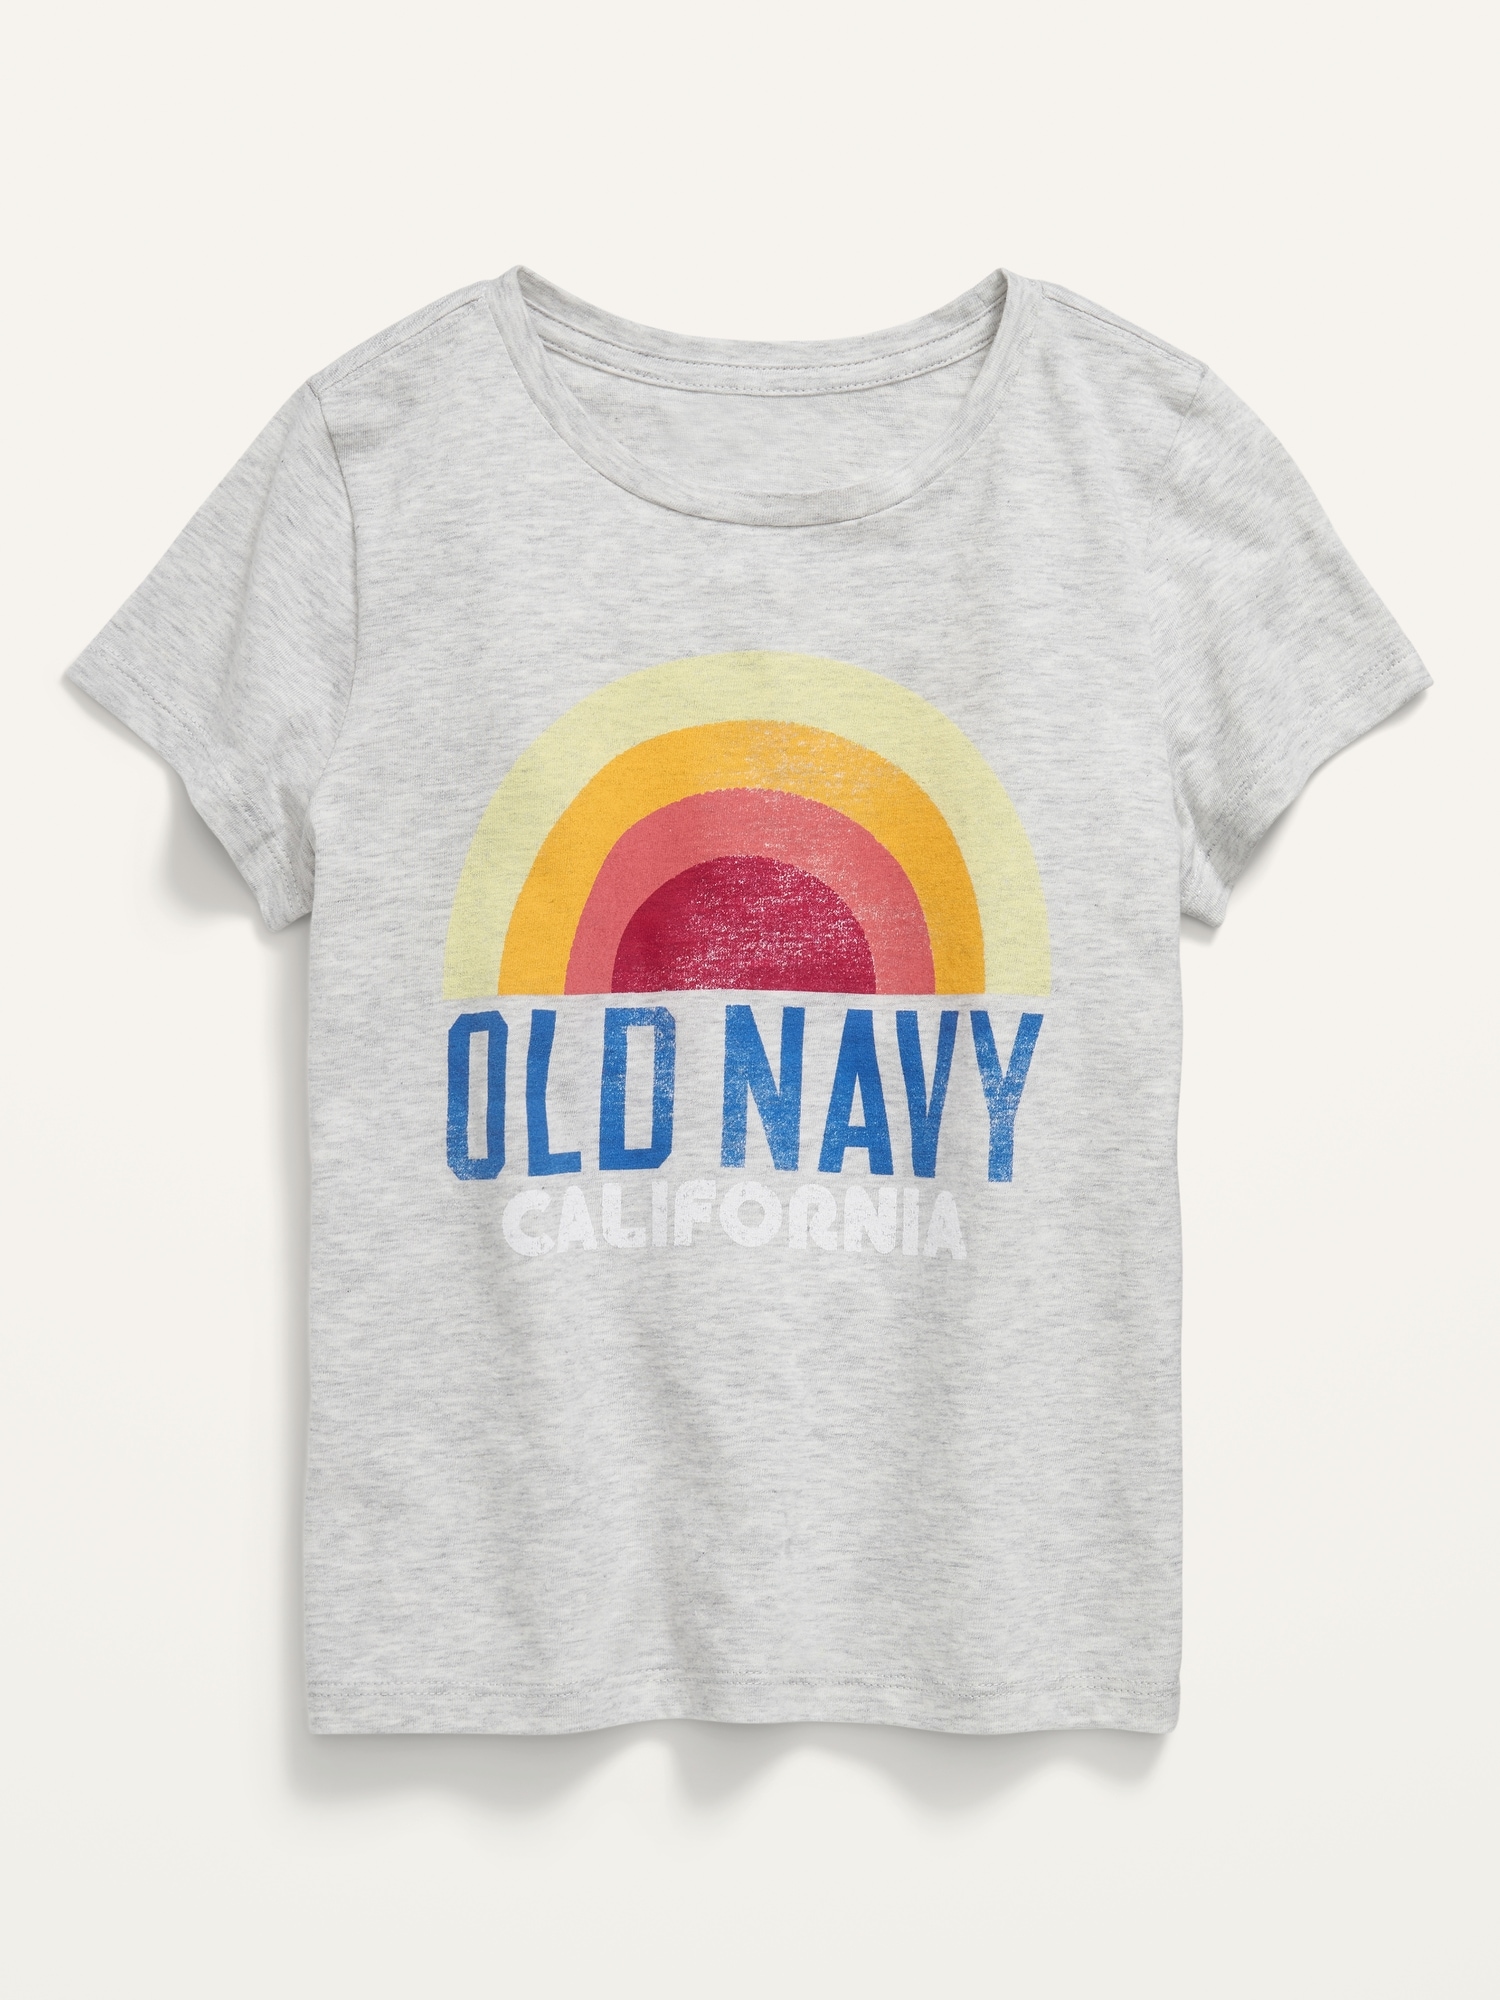 Short-Sleeve Logo-Graphic T-Shirt for Girls On Sale At Old Navy